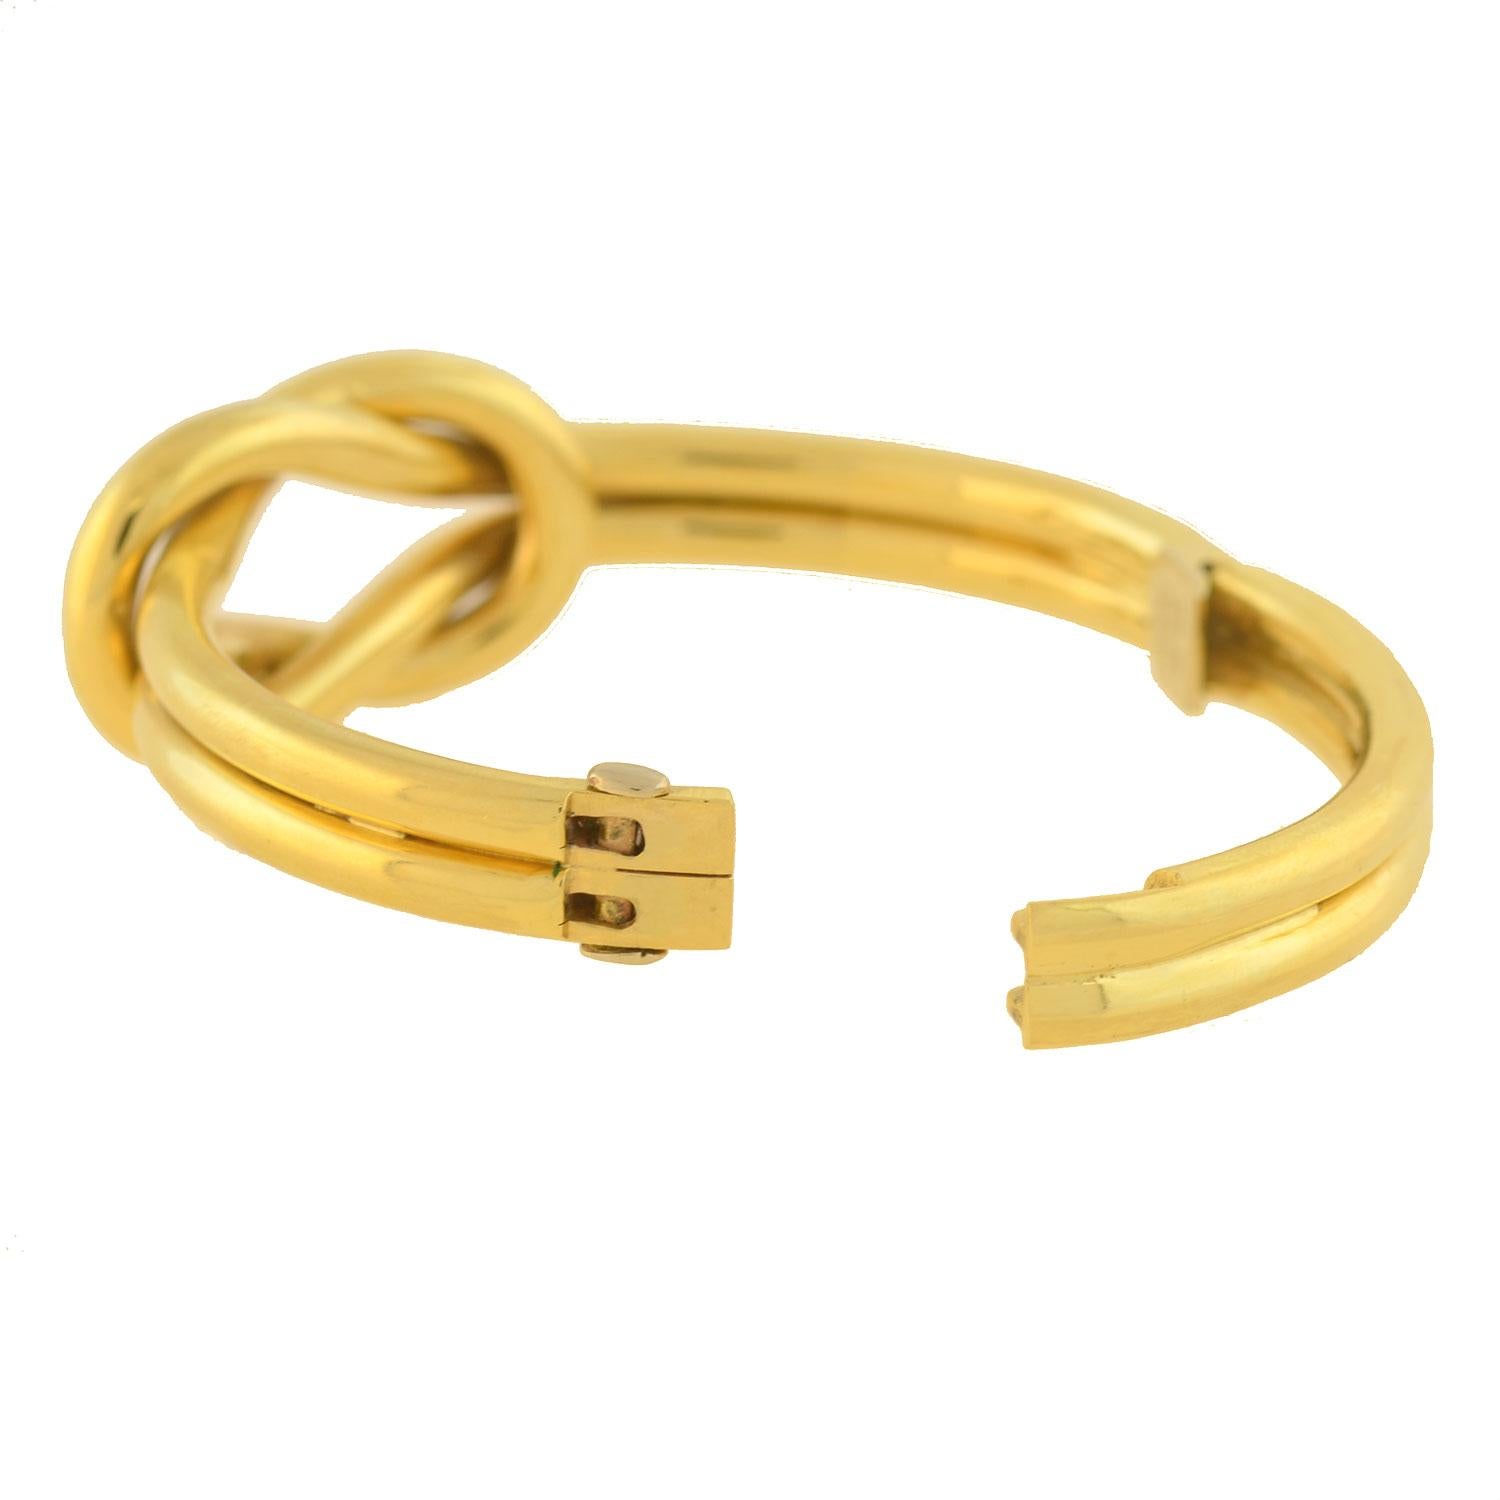 A stunning Estate love knot bangle bracelet from 1970s era! Crafted in 18kt yellow gold, this gorgeous piece features a large love knot design at its center. The bangle is comprised of two gold tubes that wrap around the wrist and intertwine at the